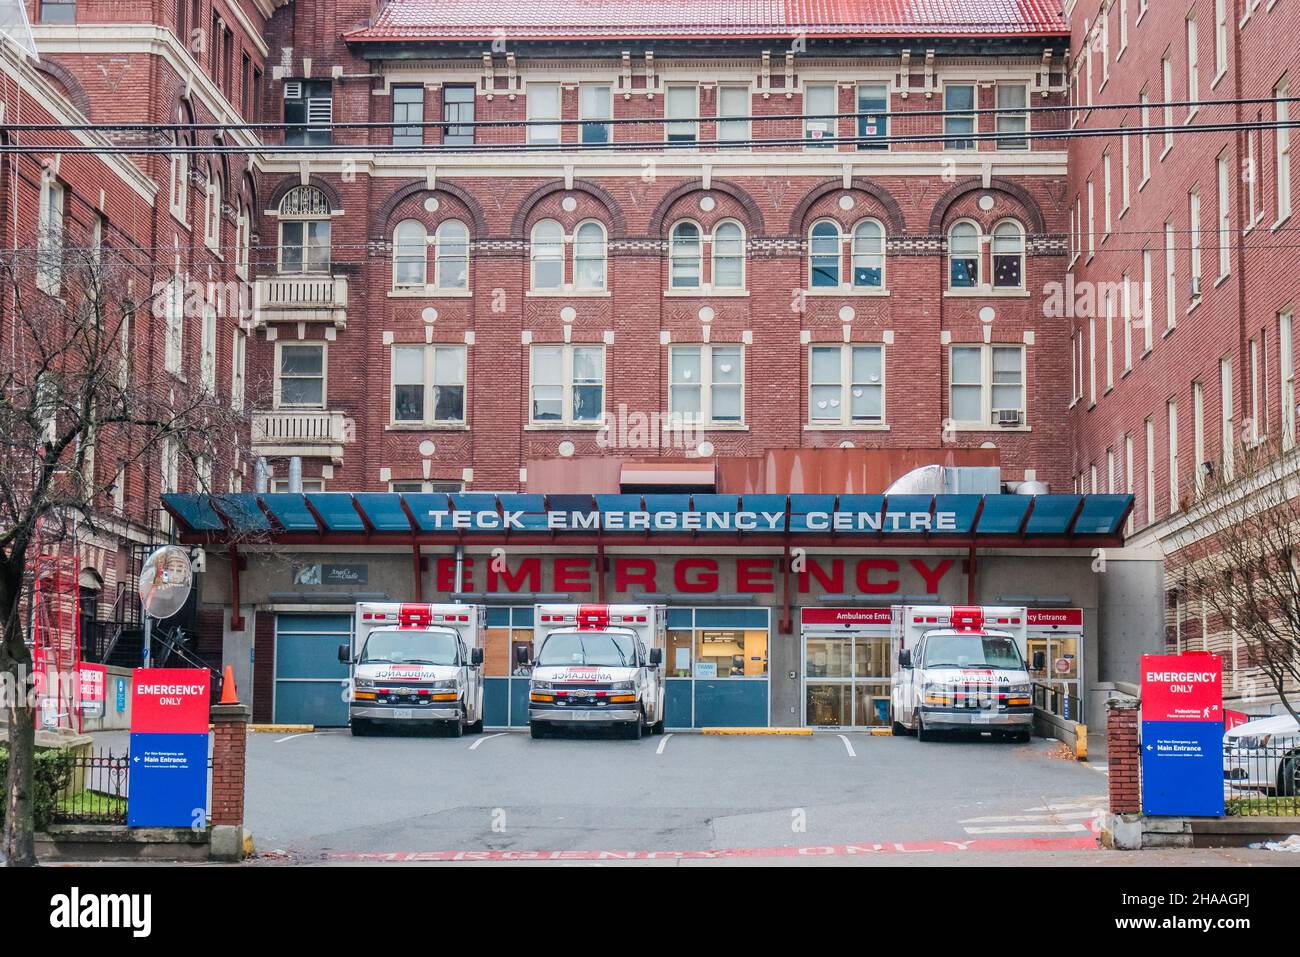 St. Paul's Hospital is an acute care hospital located in downtown Vancouver, British Columbia, Canada. It is the oldest of the seven health care facil Stock Photo